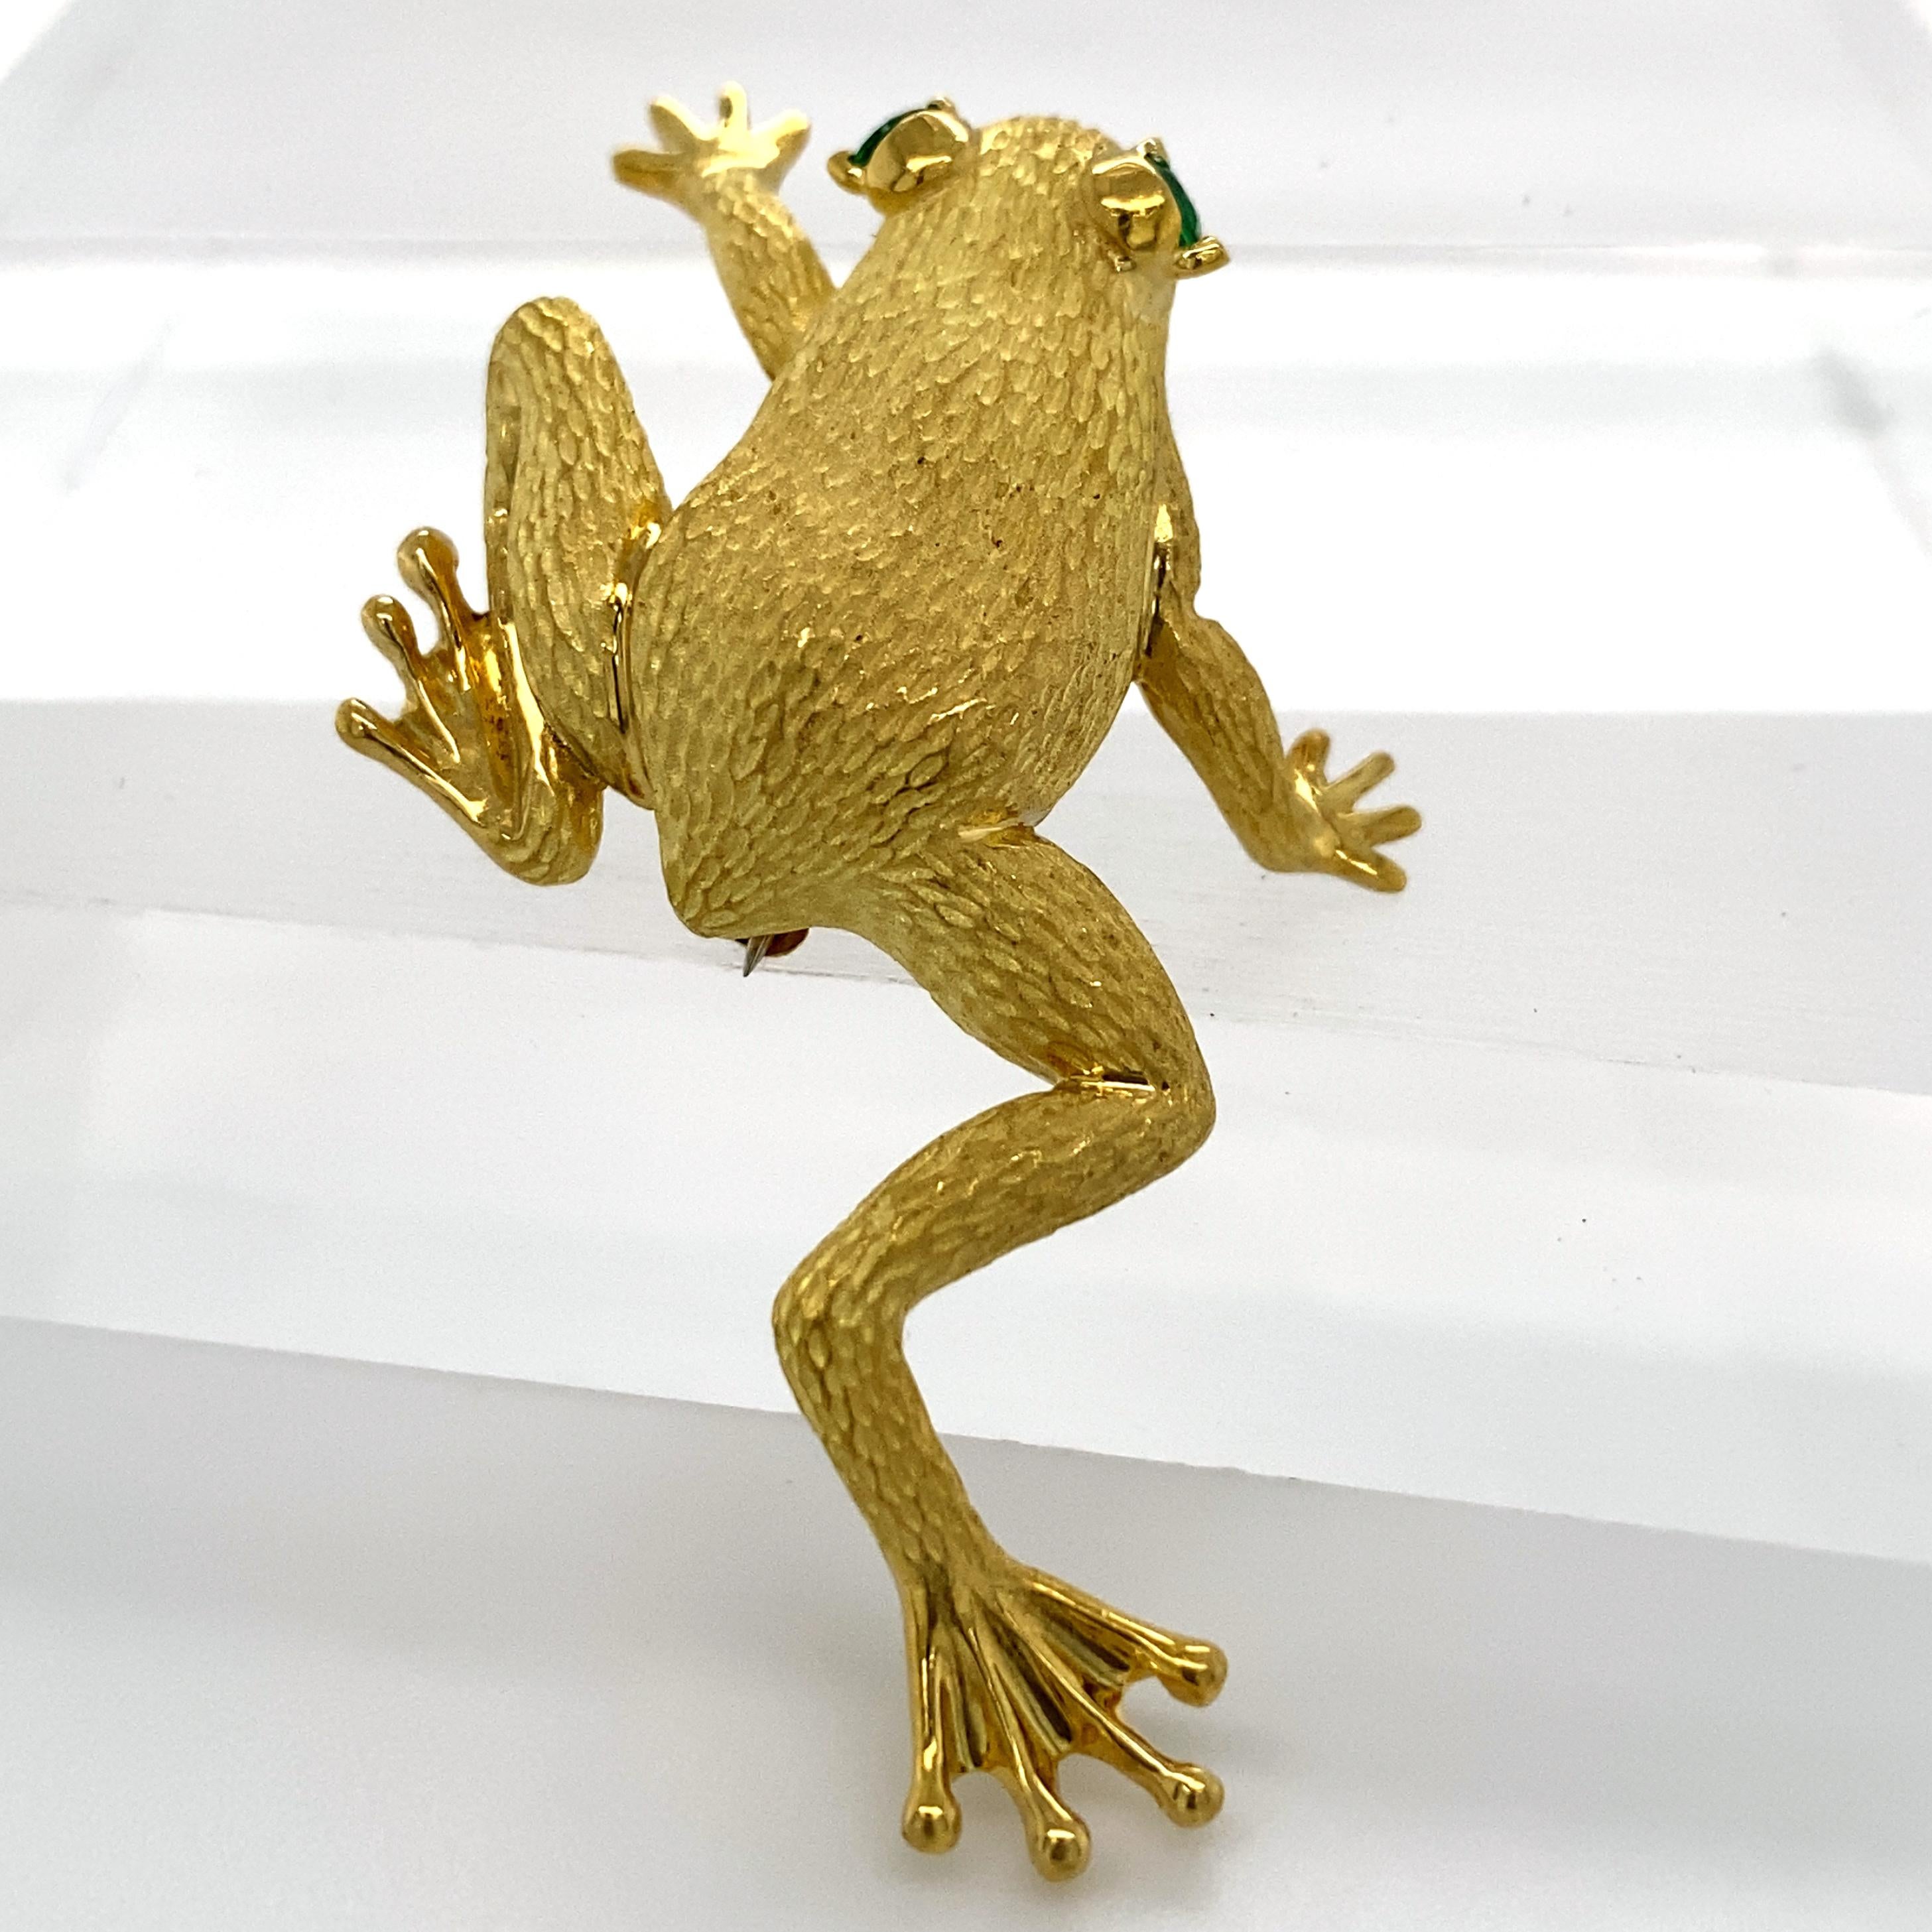 Heny Dunay designed naturalistic, yet luxurious and finely detailed jewelry for Neiman Marcus for years, and he had a few different frog designs.  This particular pin came in two different sizes -- ours is the smaller verfsion.  The surface work is